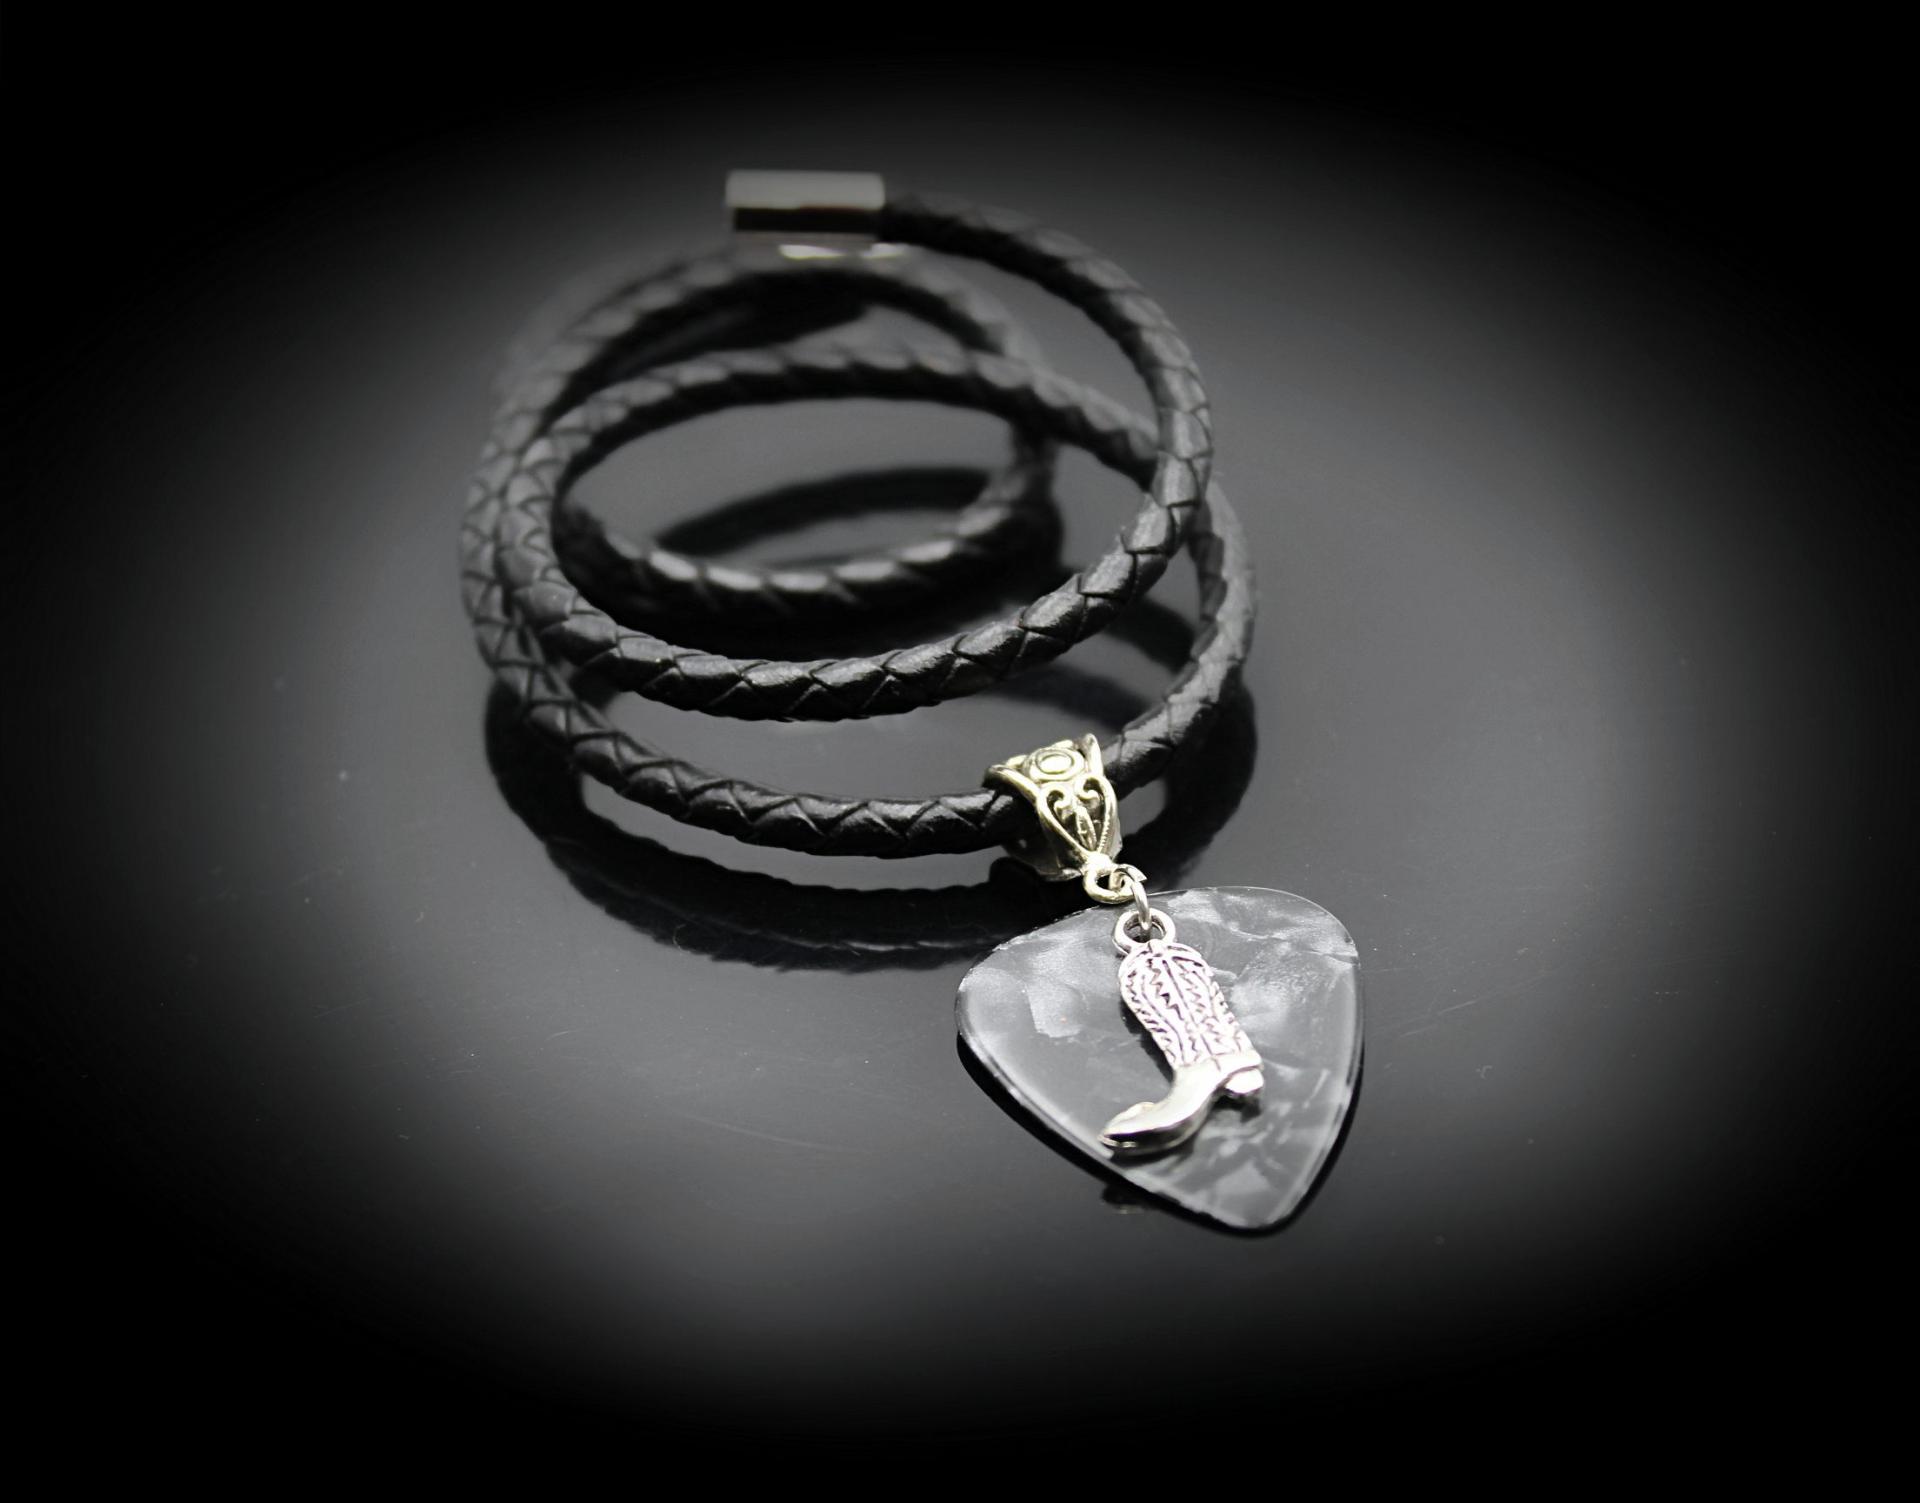 Cowboy Boot Necklace or Choker on Guitar Pick 